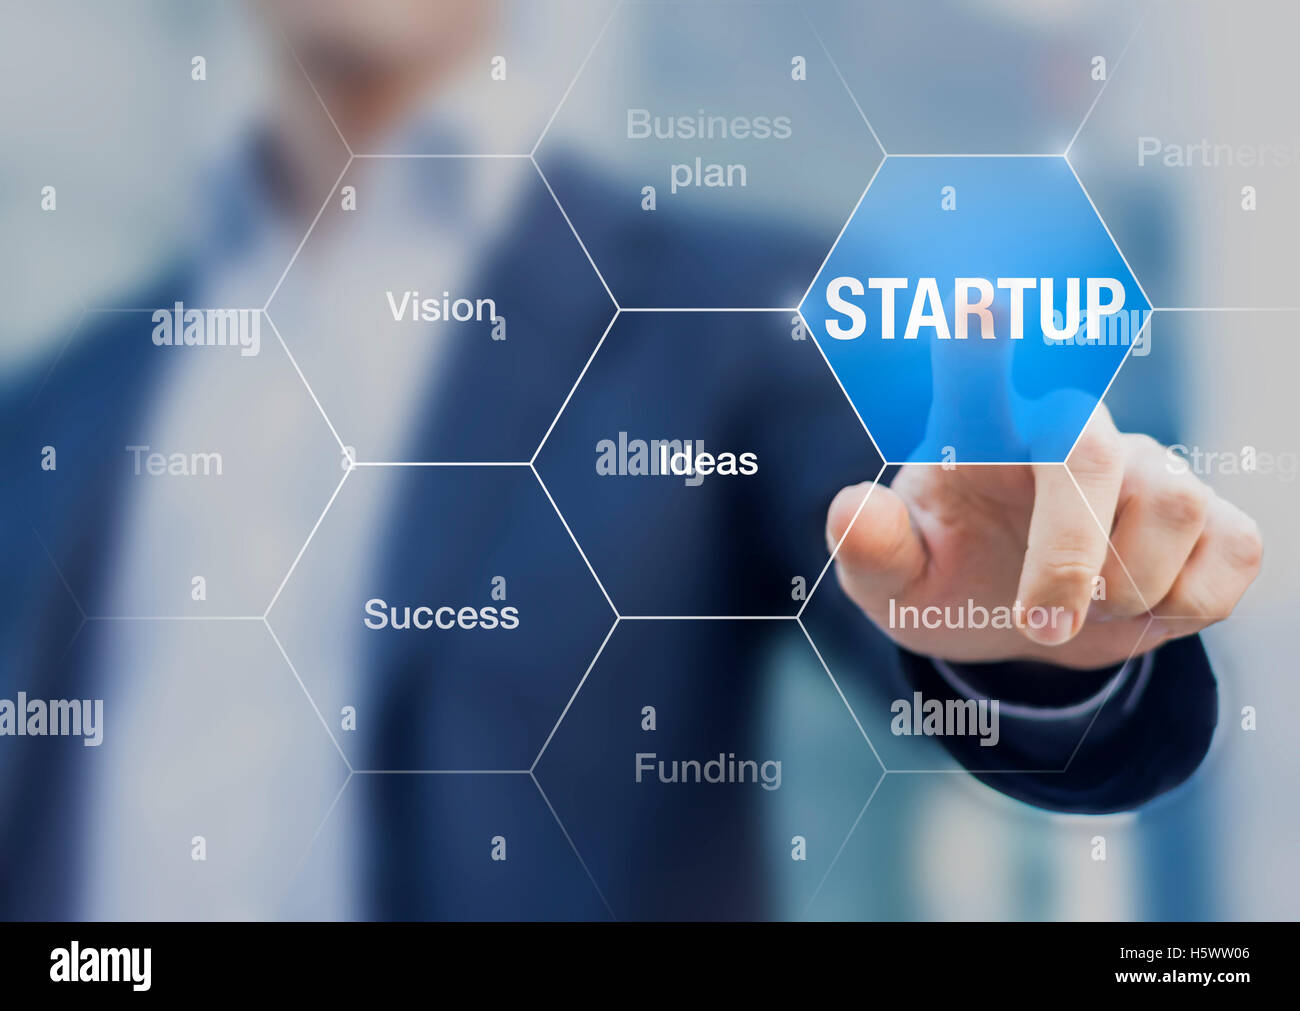 Startup button on a virtual screen touched by a businessman, concept about small fast growing businesses Stock Photo